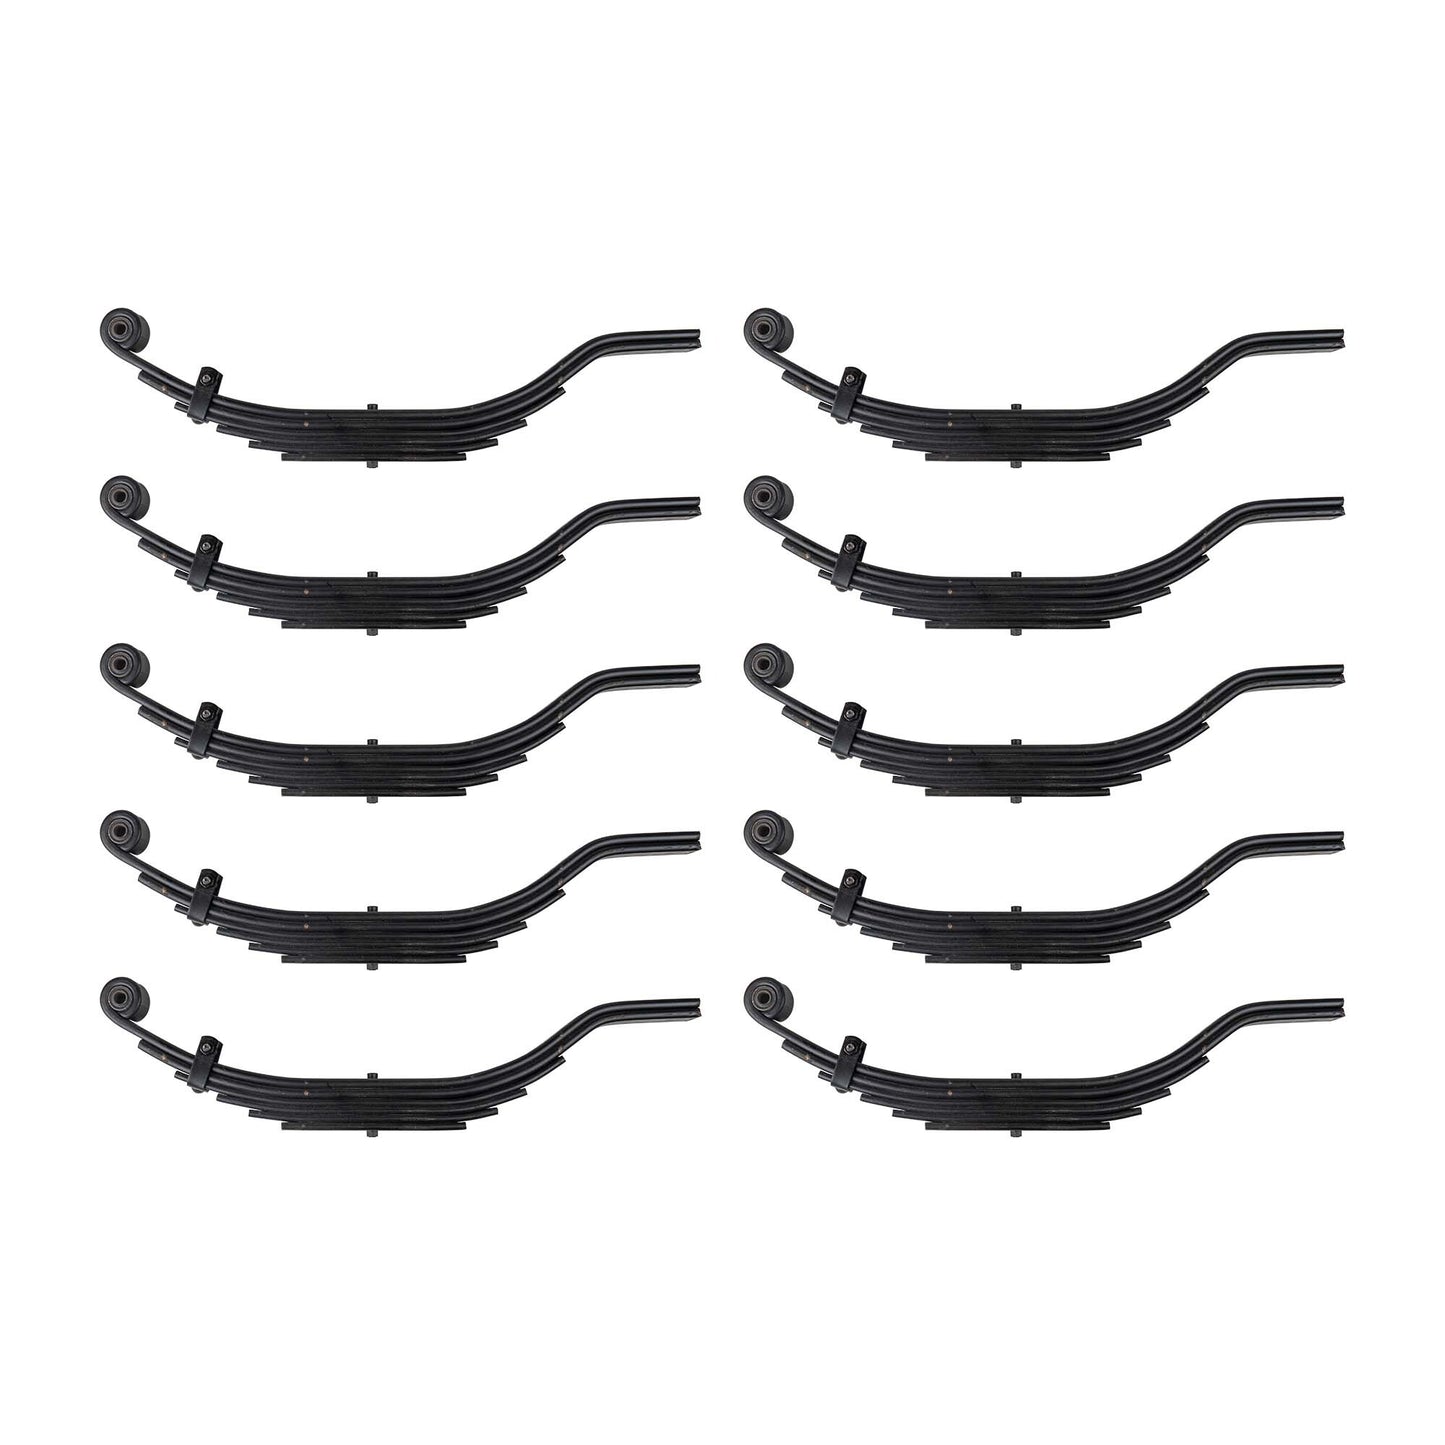 6 Leaf 30" x 2" Wide Trailer Heavy Duty Slipper Spring for 9000 lb Axles - The Trailer Parts Outlet